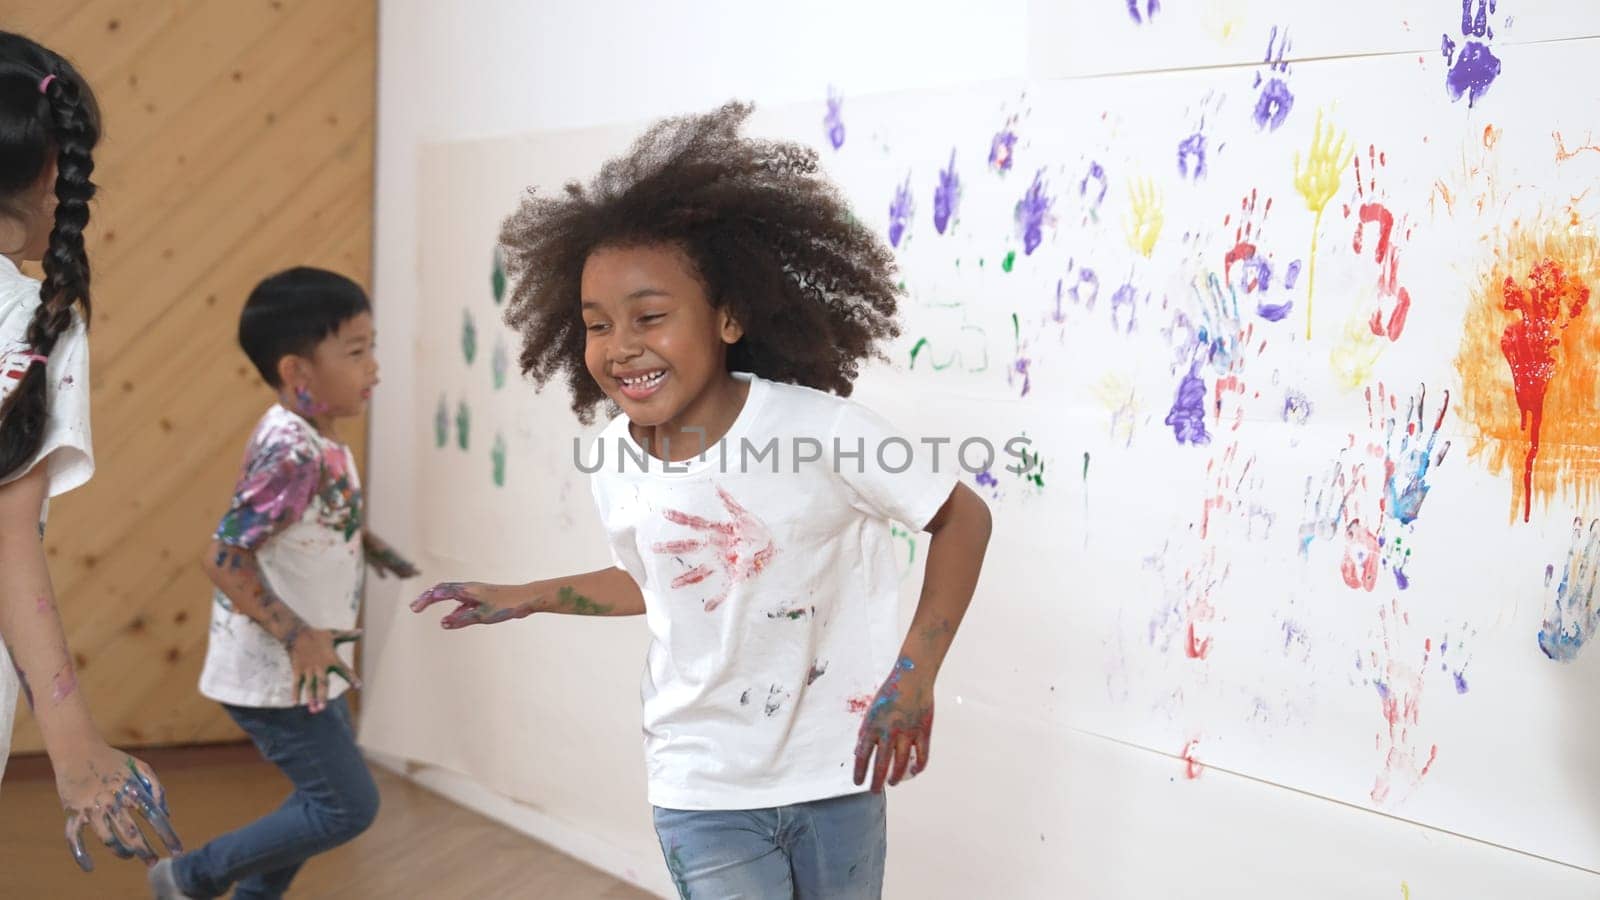 Young asian boy running to stamp colored hand print at cute african girl shirt. Student playing in art lesson with white background stained with colorful color. Creativity activity concept. Erudition.